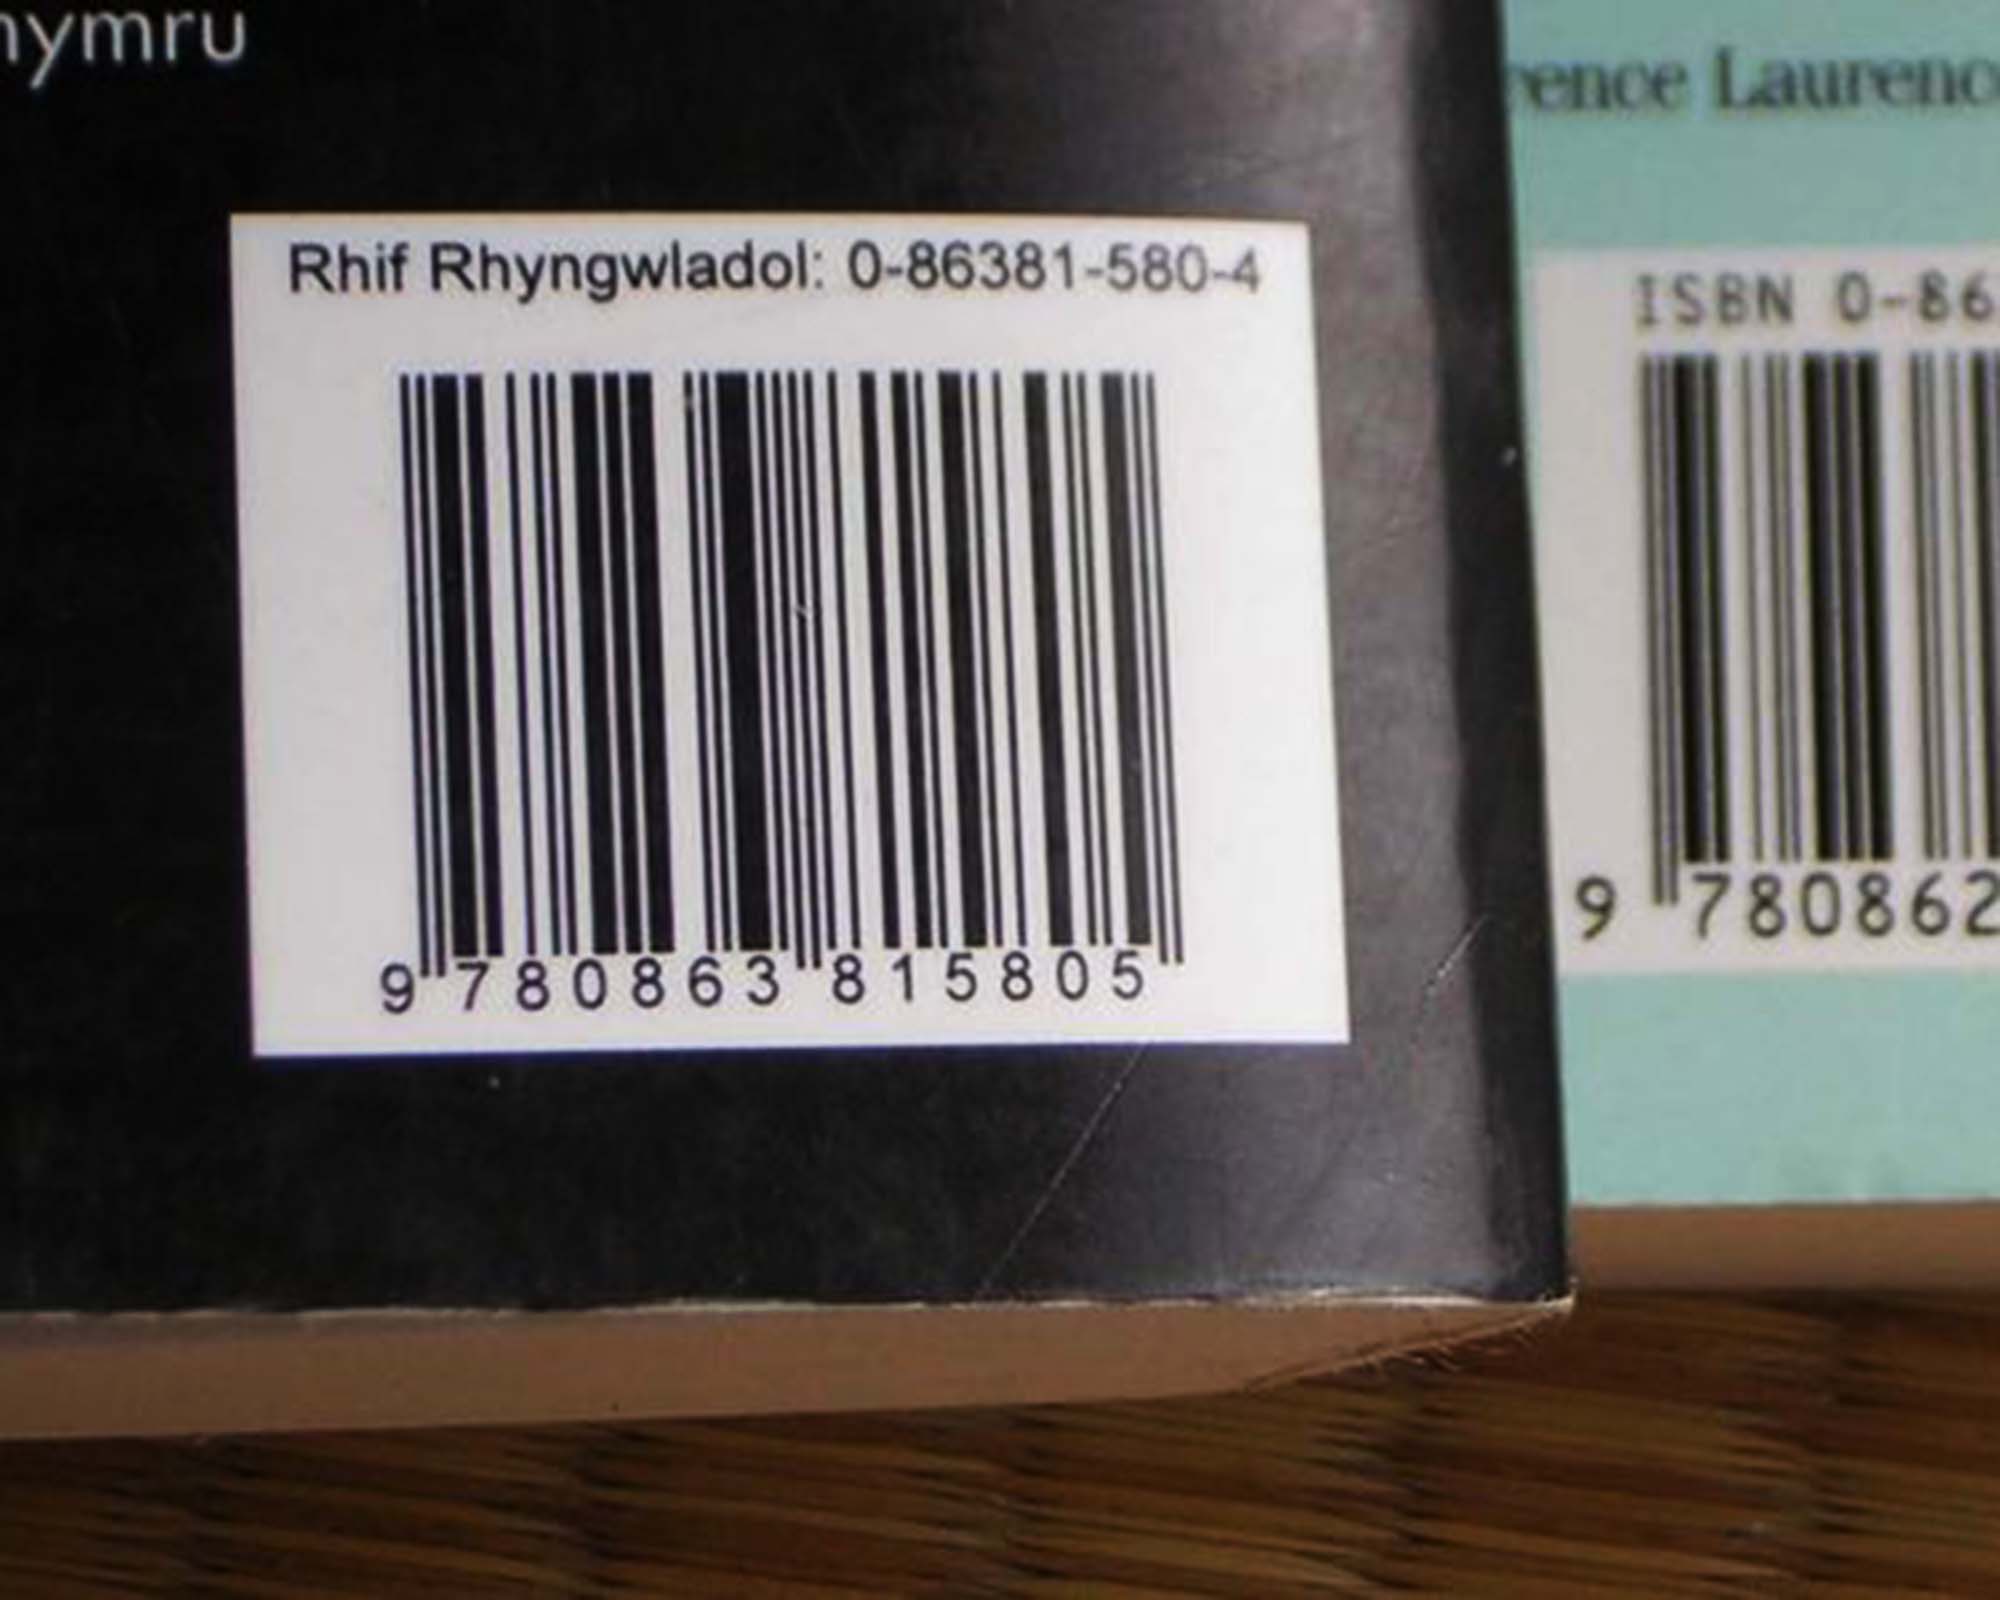 Does Your eBook Need an ISBN?